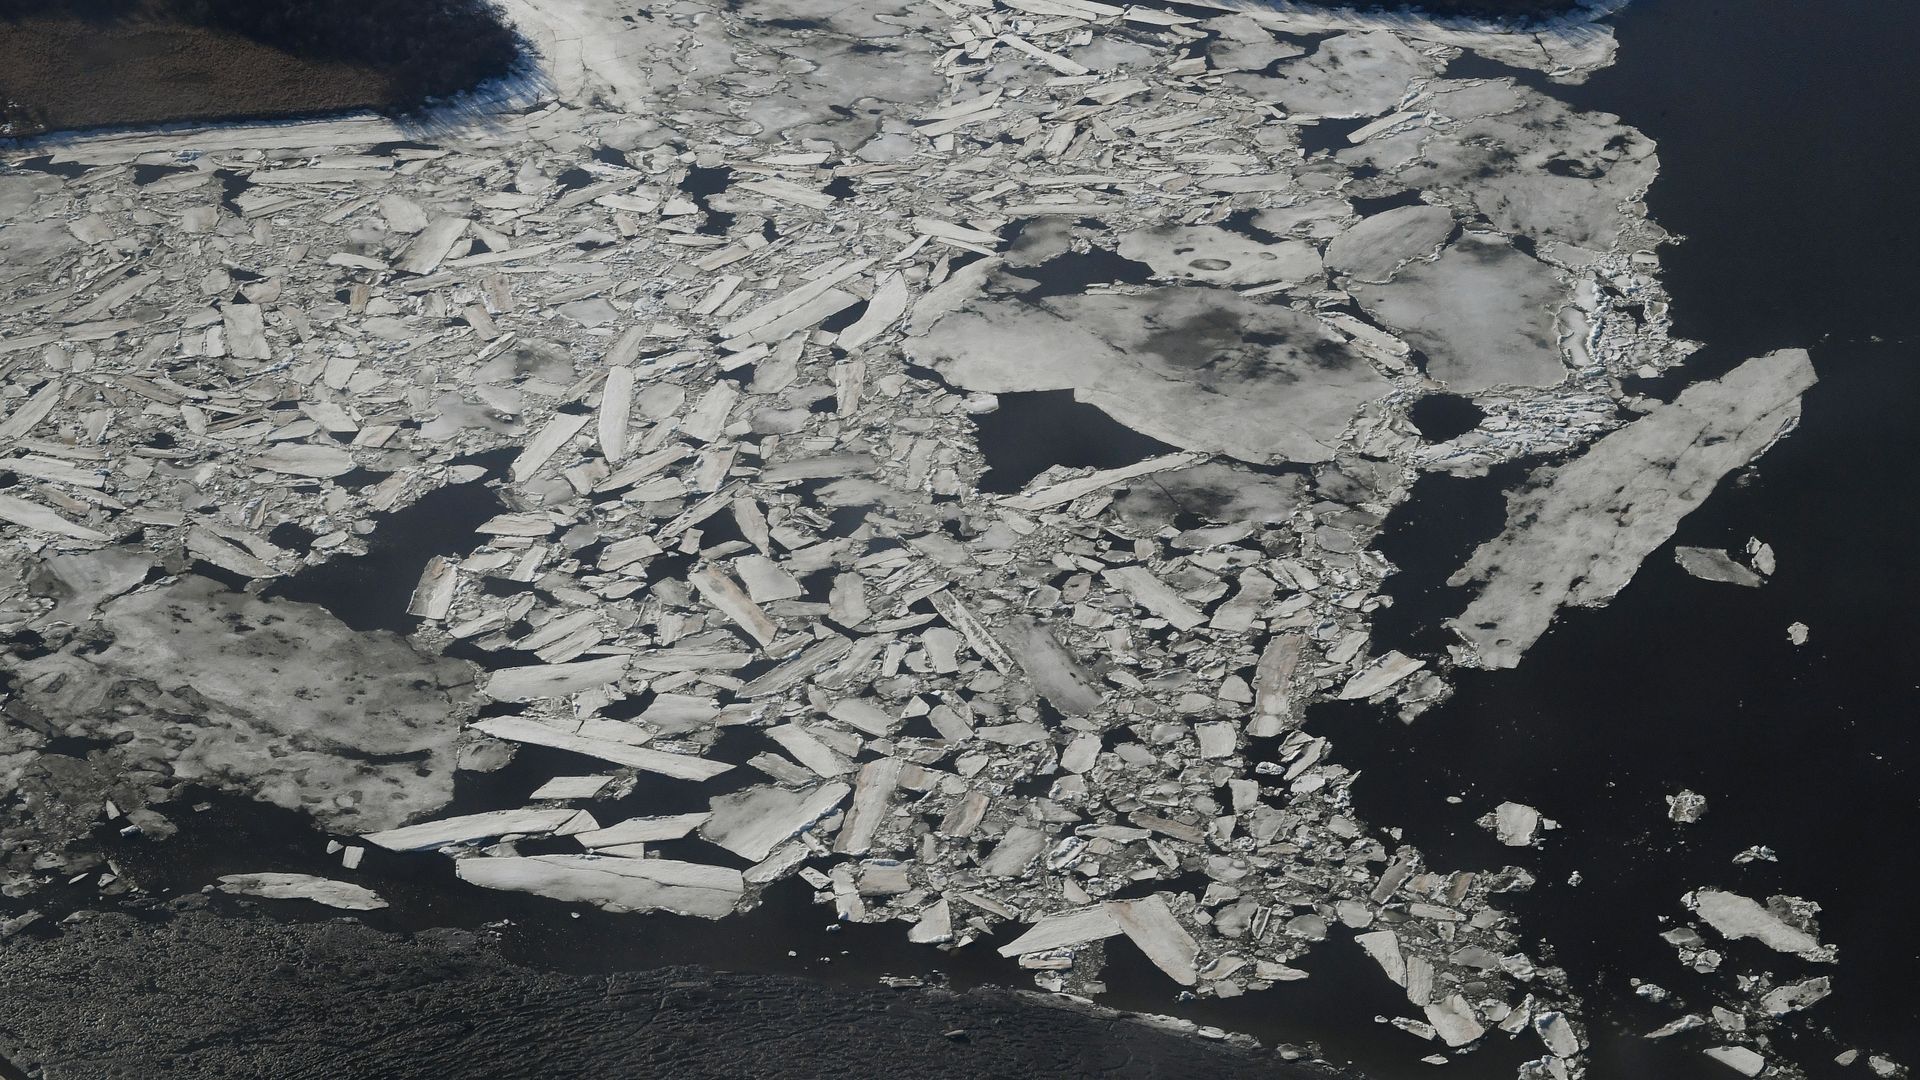 This photo is a birds eye view of melting ice in Alaska.